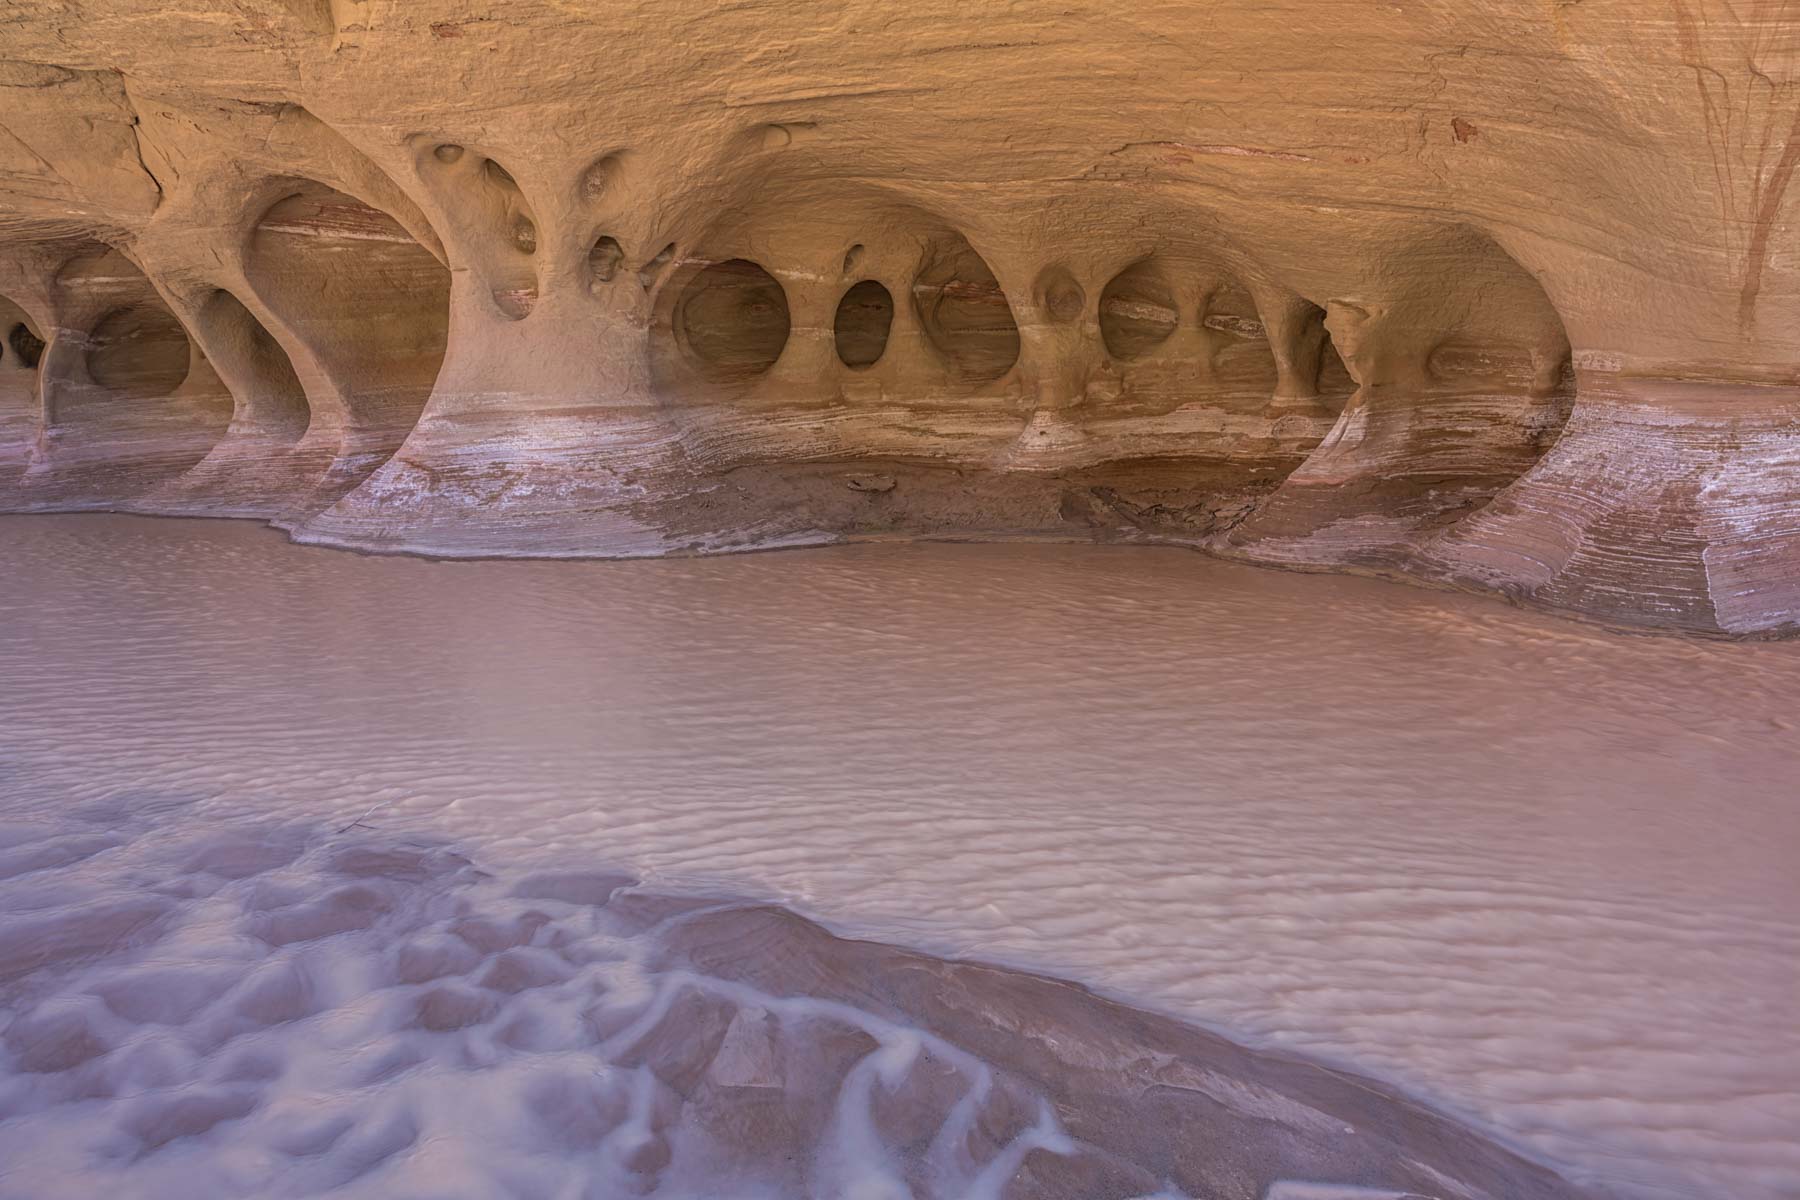 The Paria Windows in the Grand Staircase Escalante National Monument